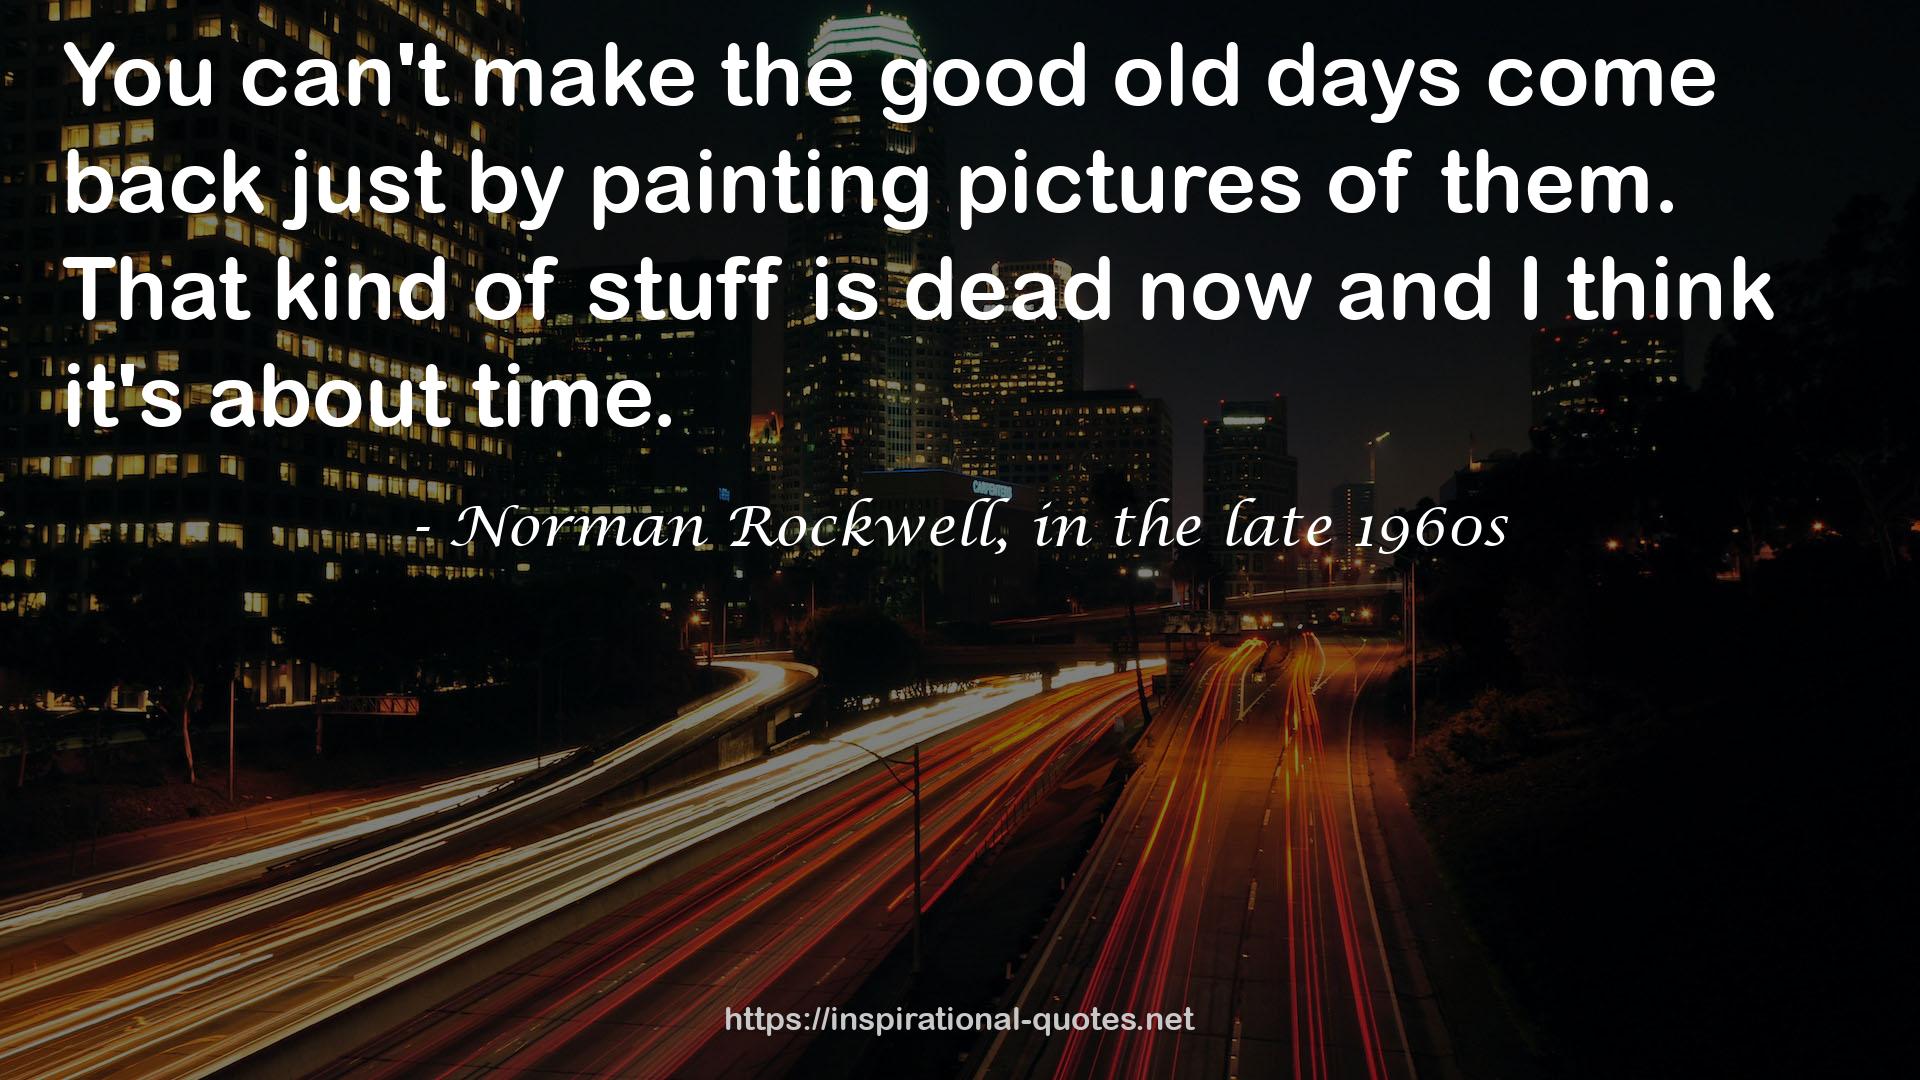 Norman Rockwell, in the late 1960s QUOTES